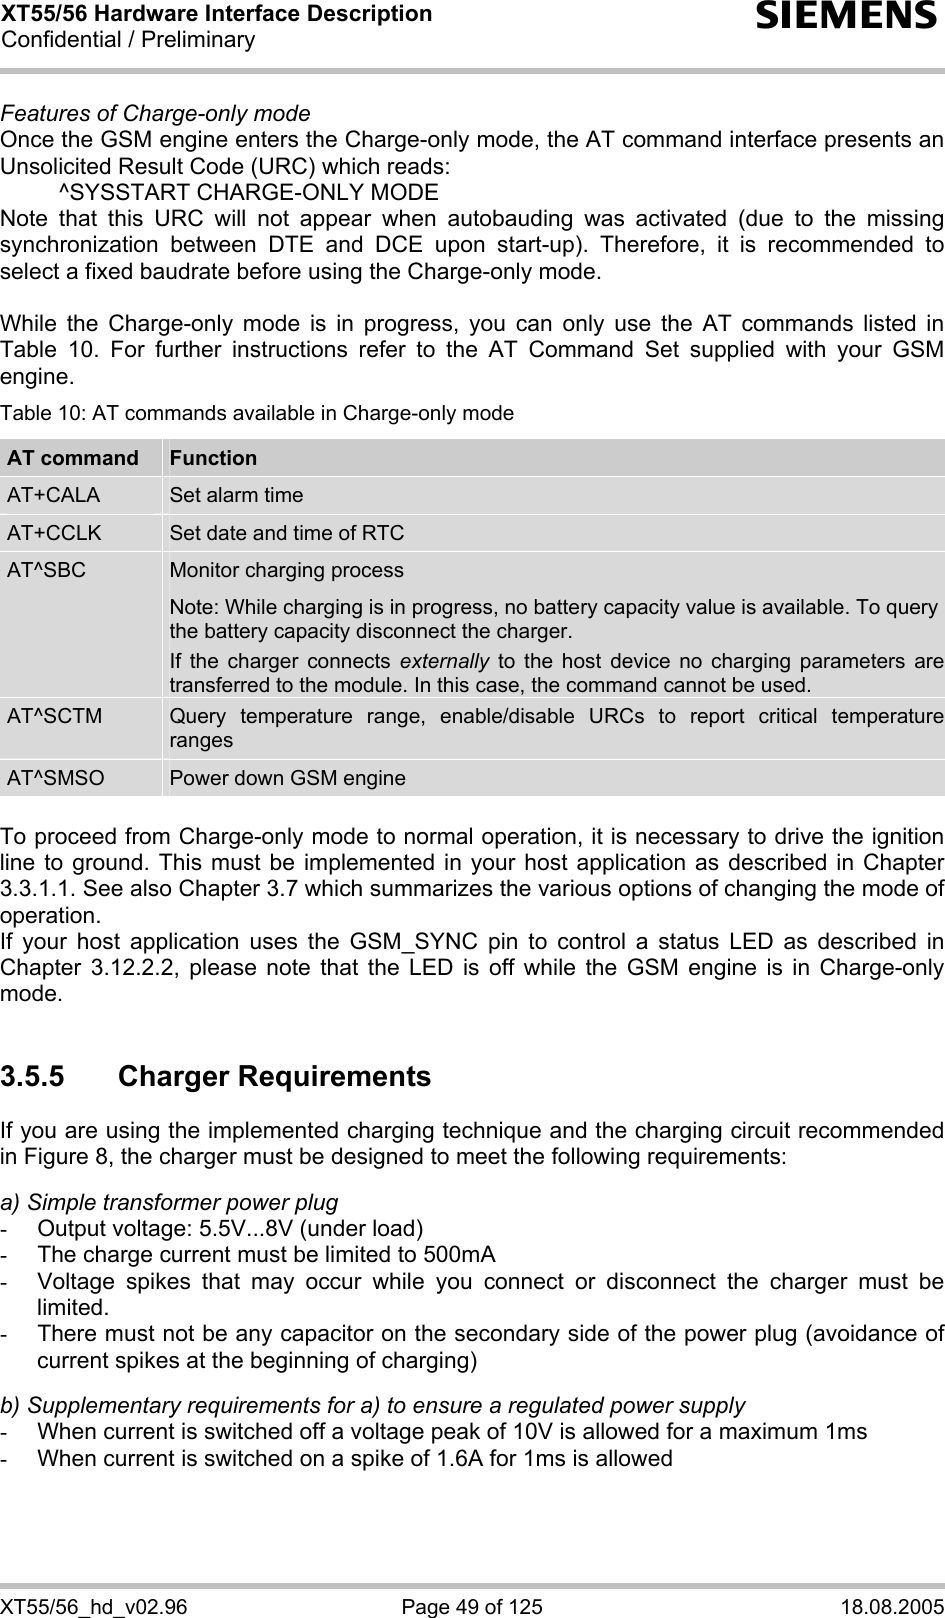 XT55/56 Hardware Interface Description Confidential / Preliminary s XT55/56_hd_v02.96  Page 49 of 125  18.08.2005 Features of Charge-only mode Once the GSM engine enters the Charge-only mode, the AT command interface presents an Unsolicited Result Code (URC) which reads:   ^SYSSTART CHARGE-ONLY MODE Note that this URC will not appear when autobauding was activated (due to the missing synchronization between DTE and DCE upon start-up). Therefore, it is recommended to select a fixed baudrate before using the Charge-only mode.  While the Charge-only mode is in progress, you can only use the AT commands listed in Table 10. For further instructions refer to the AT Command Set supplied with your GSM engine. Table 10: AT commands available in Charge-only mode AT command  Function AT+CALA  Set alarm time AT+CCLK  Set date and time of RTC AT^SBC  Monitor charging process Note: While charging is in progress, no battery capacity value is available. To query the battery capacity disconnect the charger.  If the charger connects externally to the host device no charging parameters are transferred to the module. In this case, the command cannot be used. AT^SCTM  Query temperature range, enable/disable URCs to report critical temperature ranges AT^SMSO  Power down GSM engine  To proceed from Charge-only mode to normal operation, it is necessary to drive the ignition line to ground. This must be implemented in your host application as described in Chapter 3.3.1.1. See also Chapter 3.7 which summarizes the various options of changing the mode of operation. If your host application uses the GSM_SYNC pin to control a status LED as described in Chapter 3.12.2.2, please note that the LED is off while the GSM engine is in Charge-only mode.  3.5.5 Charger Requirements If you are using the implemented charging technique and the charging circuit recommended in Figure 8, the charger must be designed to meet the following requirements:   a) Simple transformer power plug -  Output voltage: 5.5V...8V (under load) -  The charge current must be limited to 500mA -  Voltage spikes that may occur while you connect or disconnect the charger must be limited. -  There must not be any capacitor on the secondary side of the power plug (avoidance of current spikes at the beginning of charging)  b) Supplementary requirements for a) to ensure a regulated power supply  -  When current is switched off a voltage peak of 10V is allowed for a maximum 1ms -  When current is switched on a spike of 1.6A for 1ms is allowed  